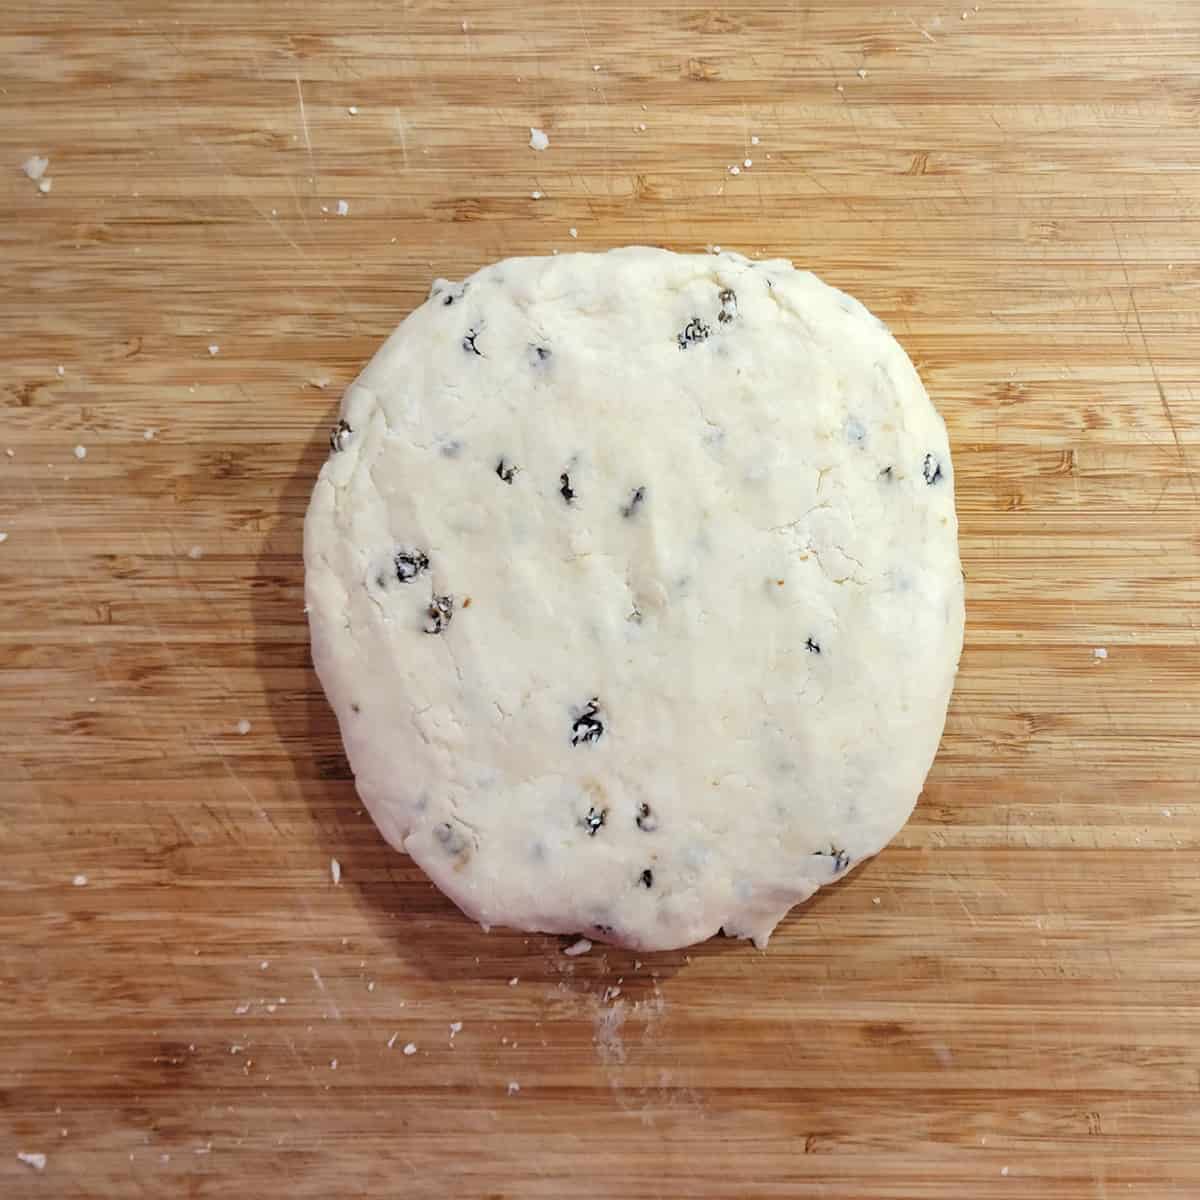 Dough formed into a circle.